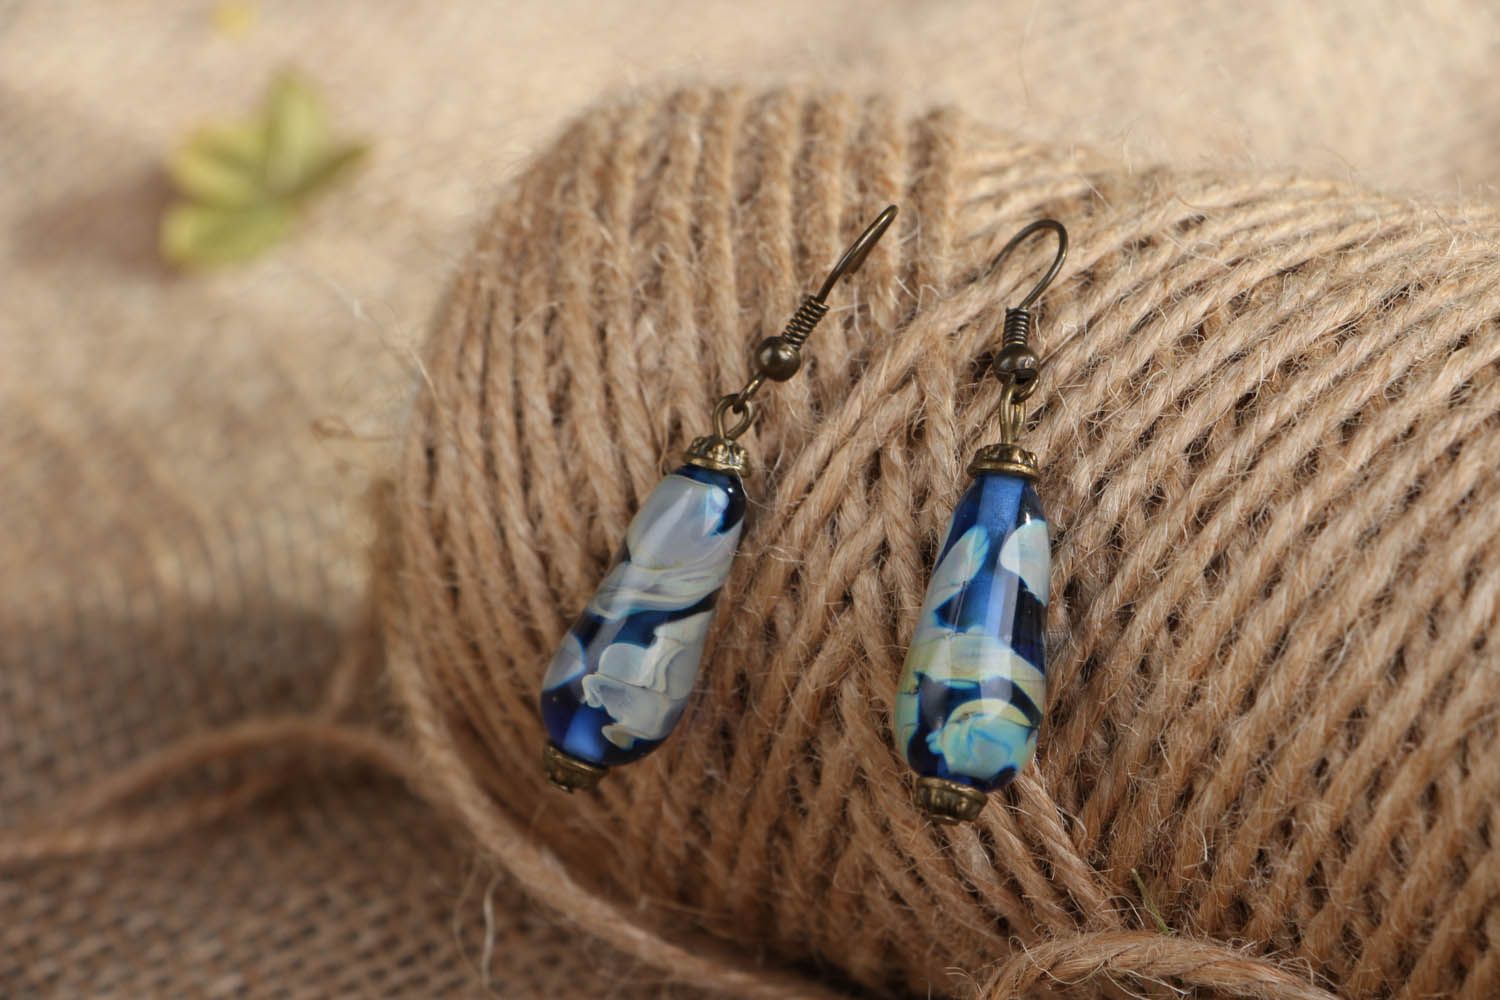 Long glass earrings Brooding clouds in the Night Sky photo 3